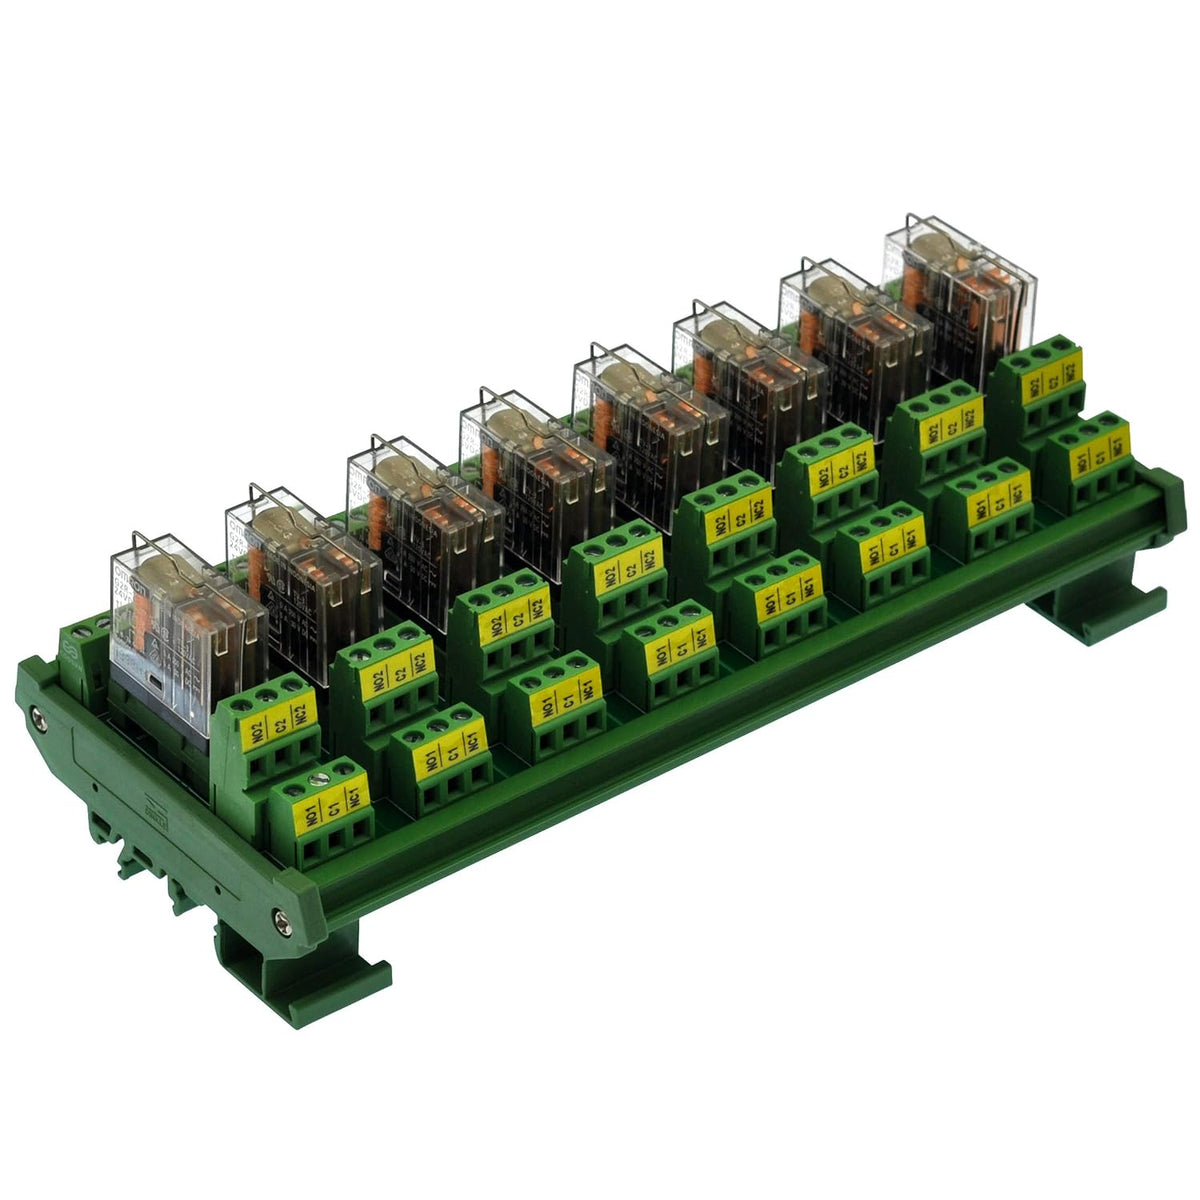 DIN Rail Mount AC/DC Control DPDT 5Amp Pluggable Power Relay Interface Module (AC/DC 24V, 8 Relay)